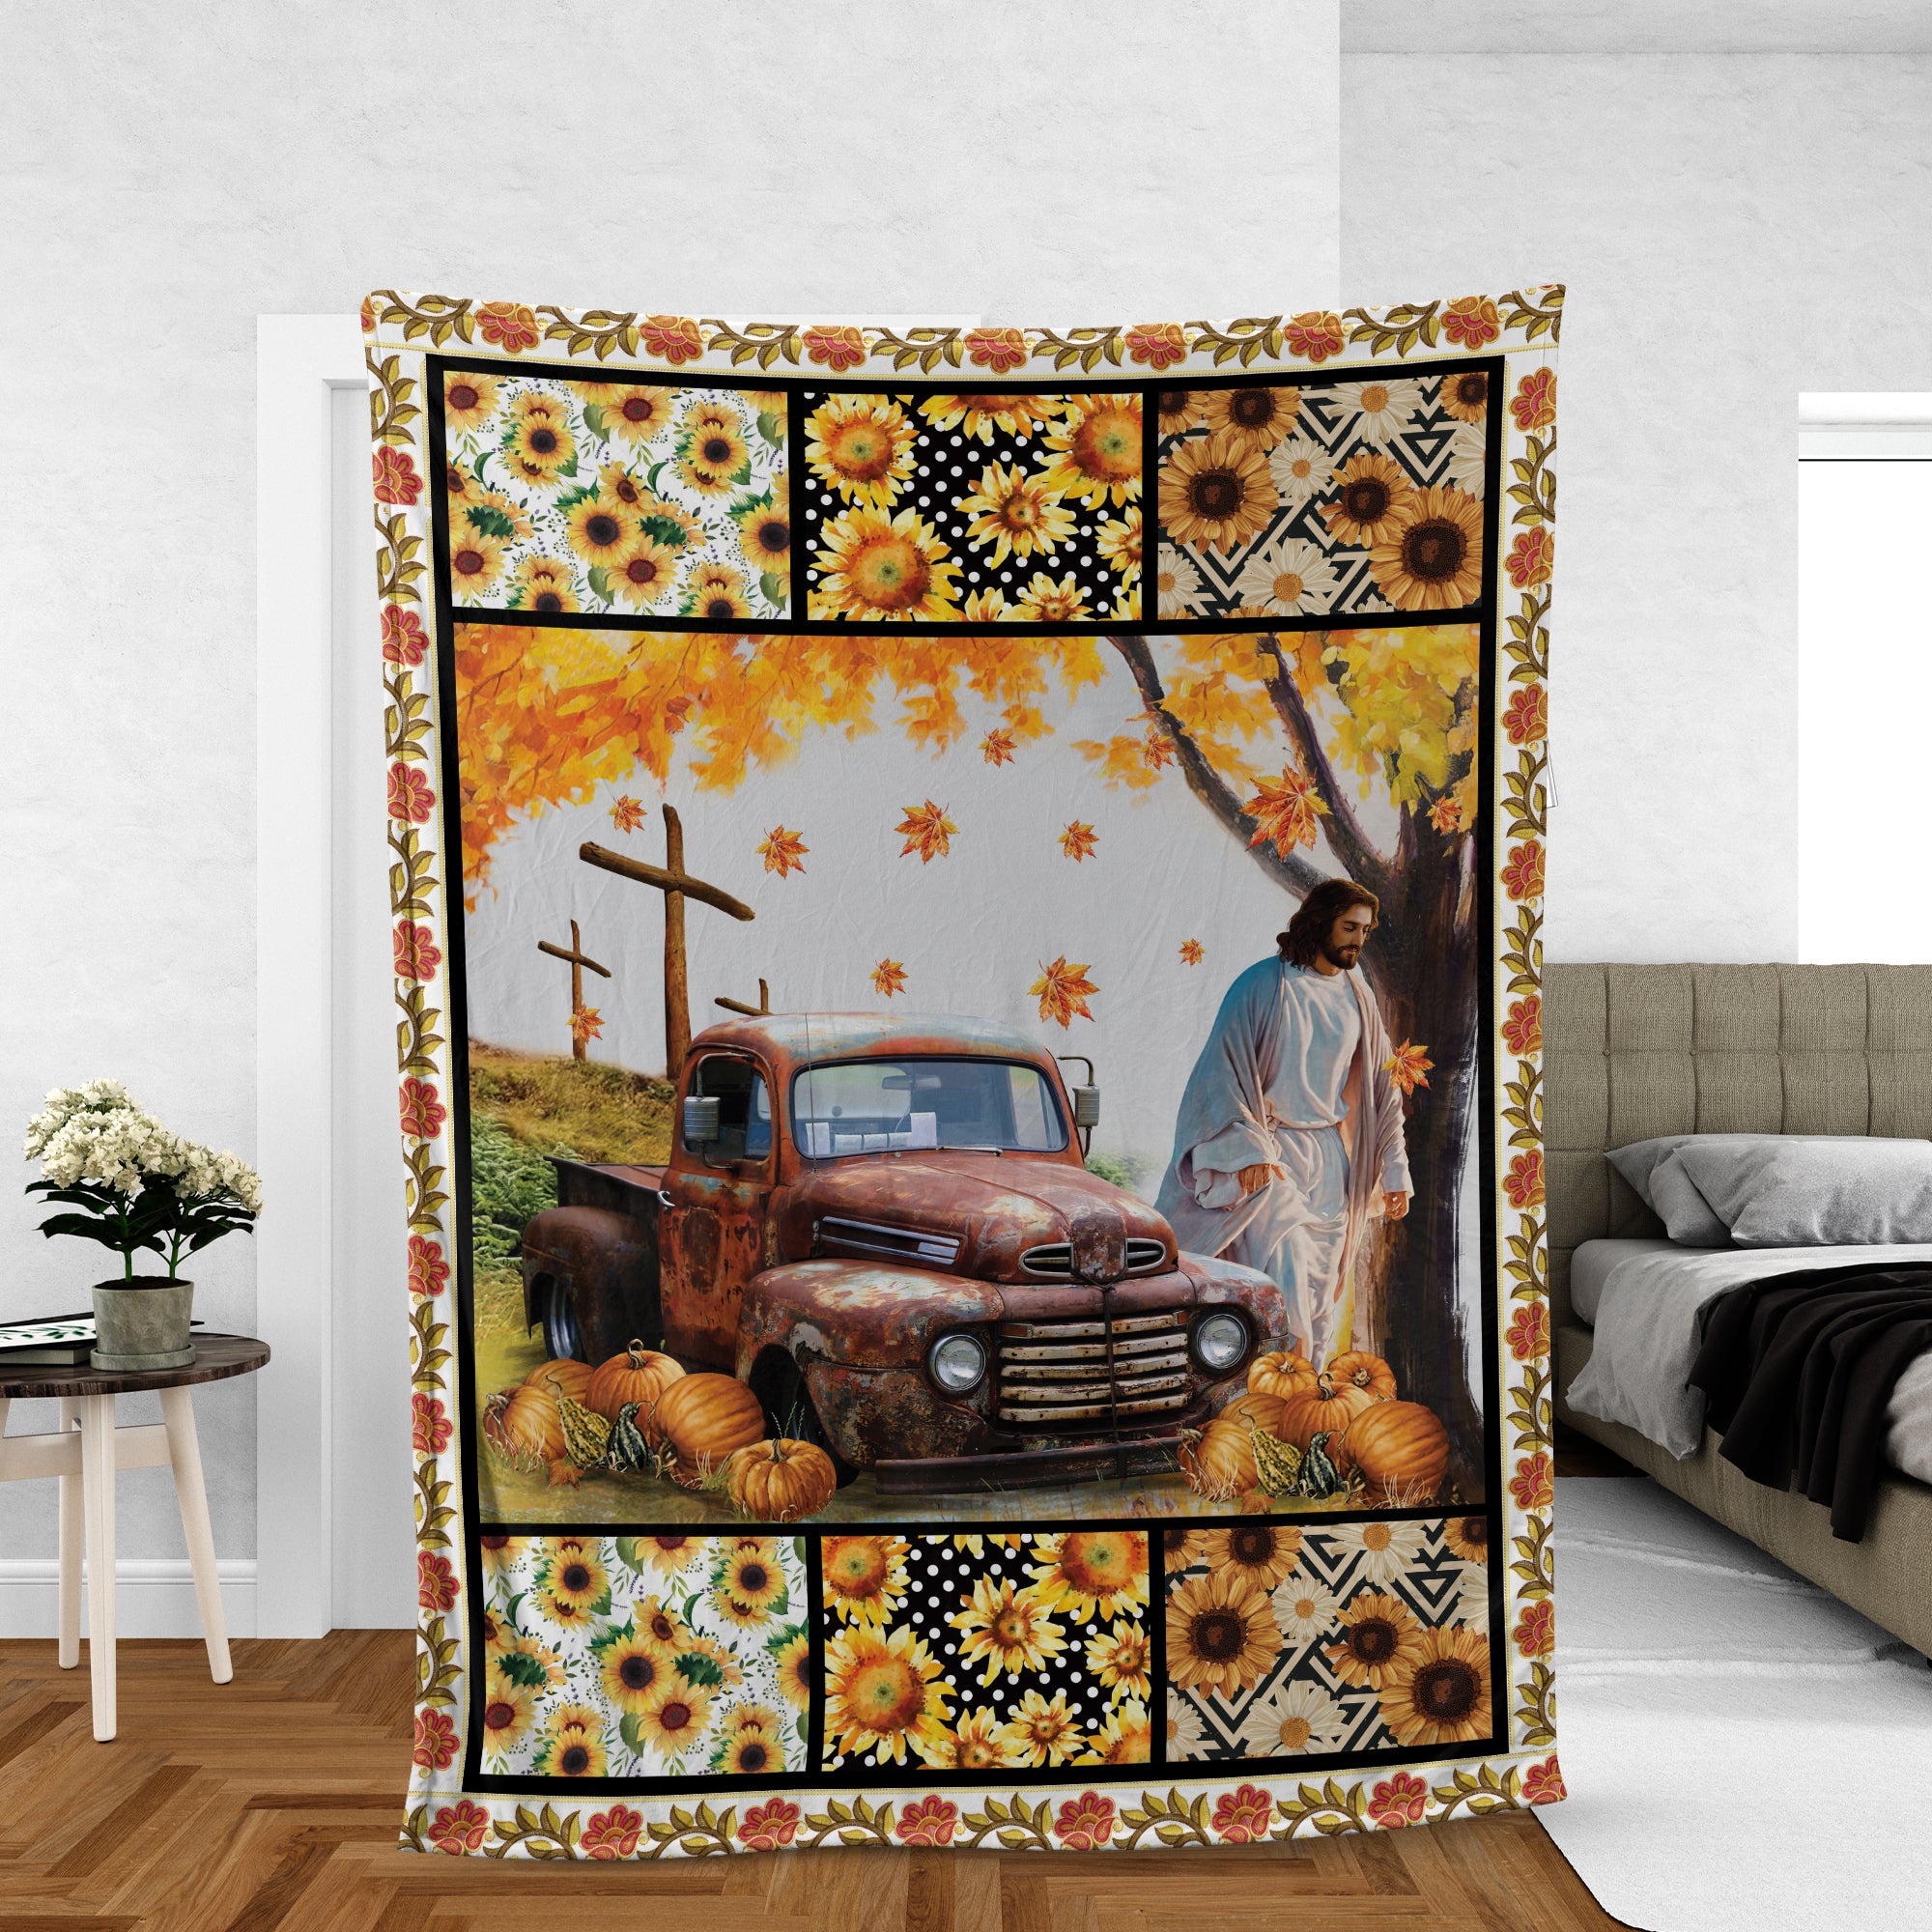 Jesus And Fall Autumn Blanket, Christian Throw Blanket, Faith Blanket, Inspirational Gift - Amazing Red Car And Pumpkins Blanket